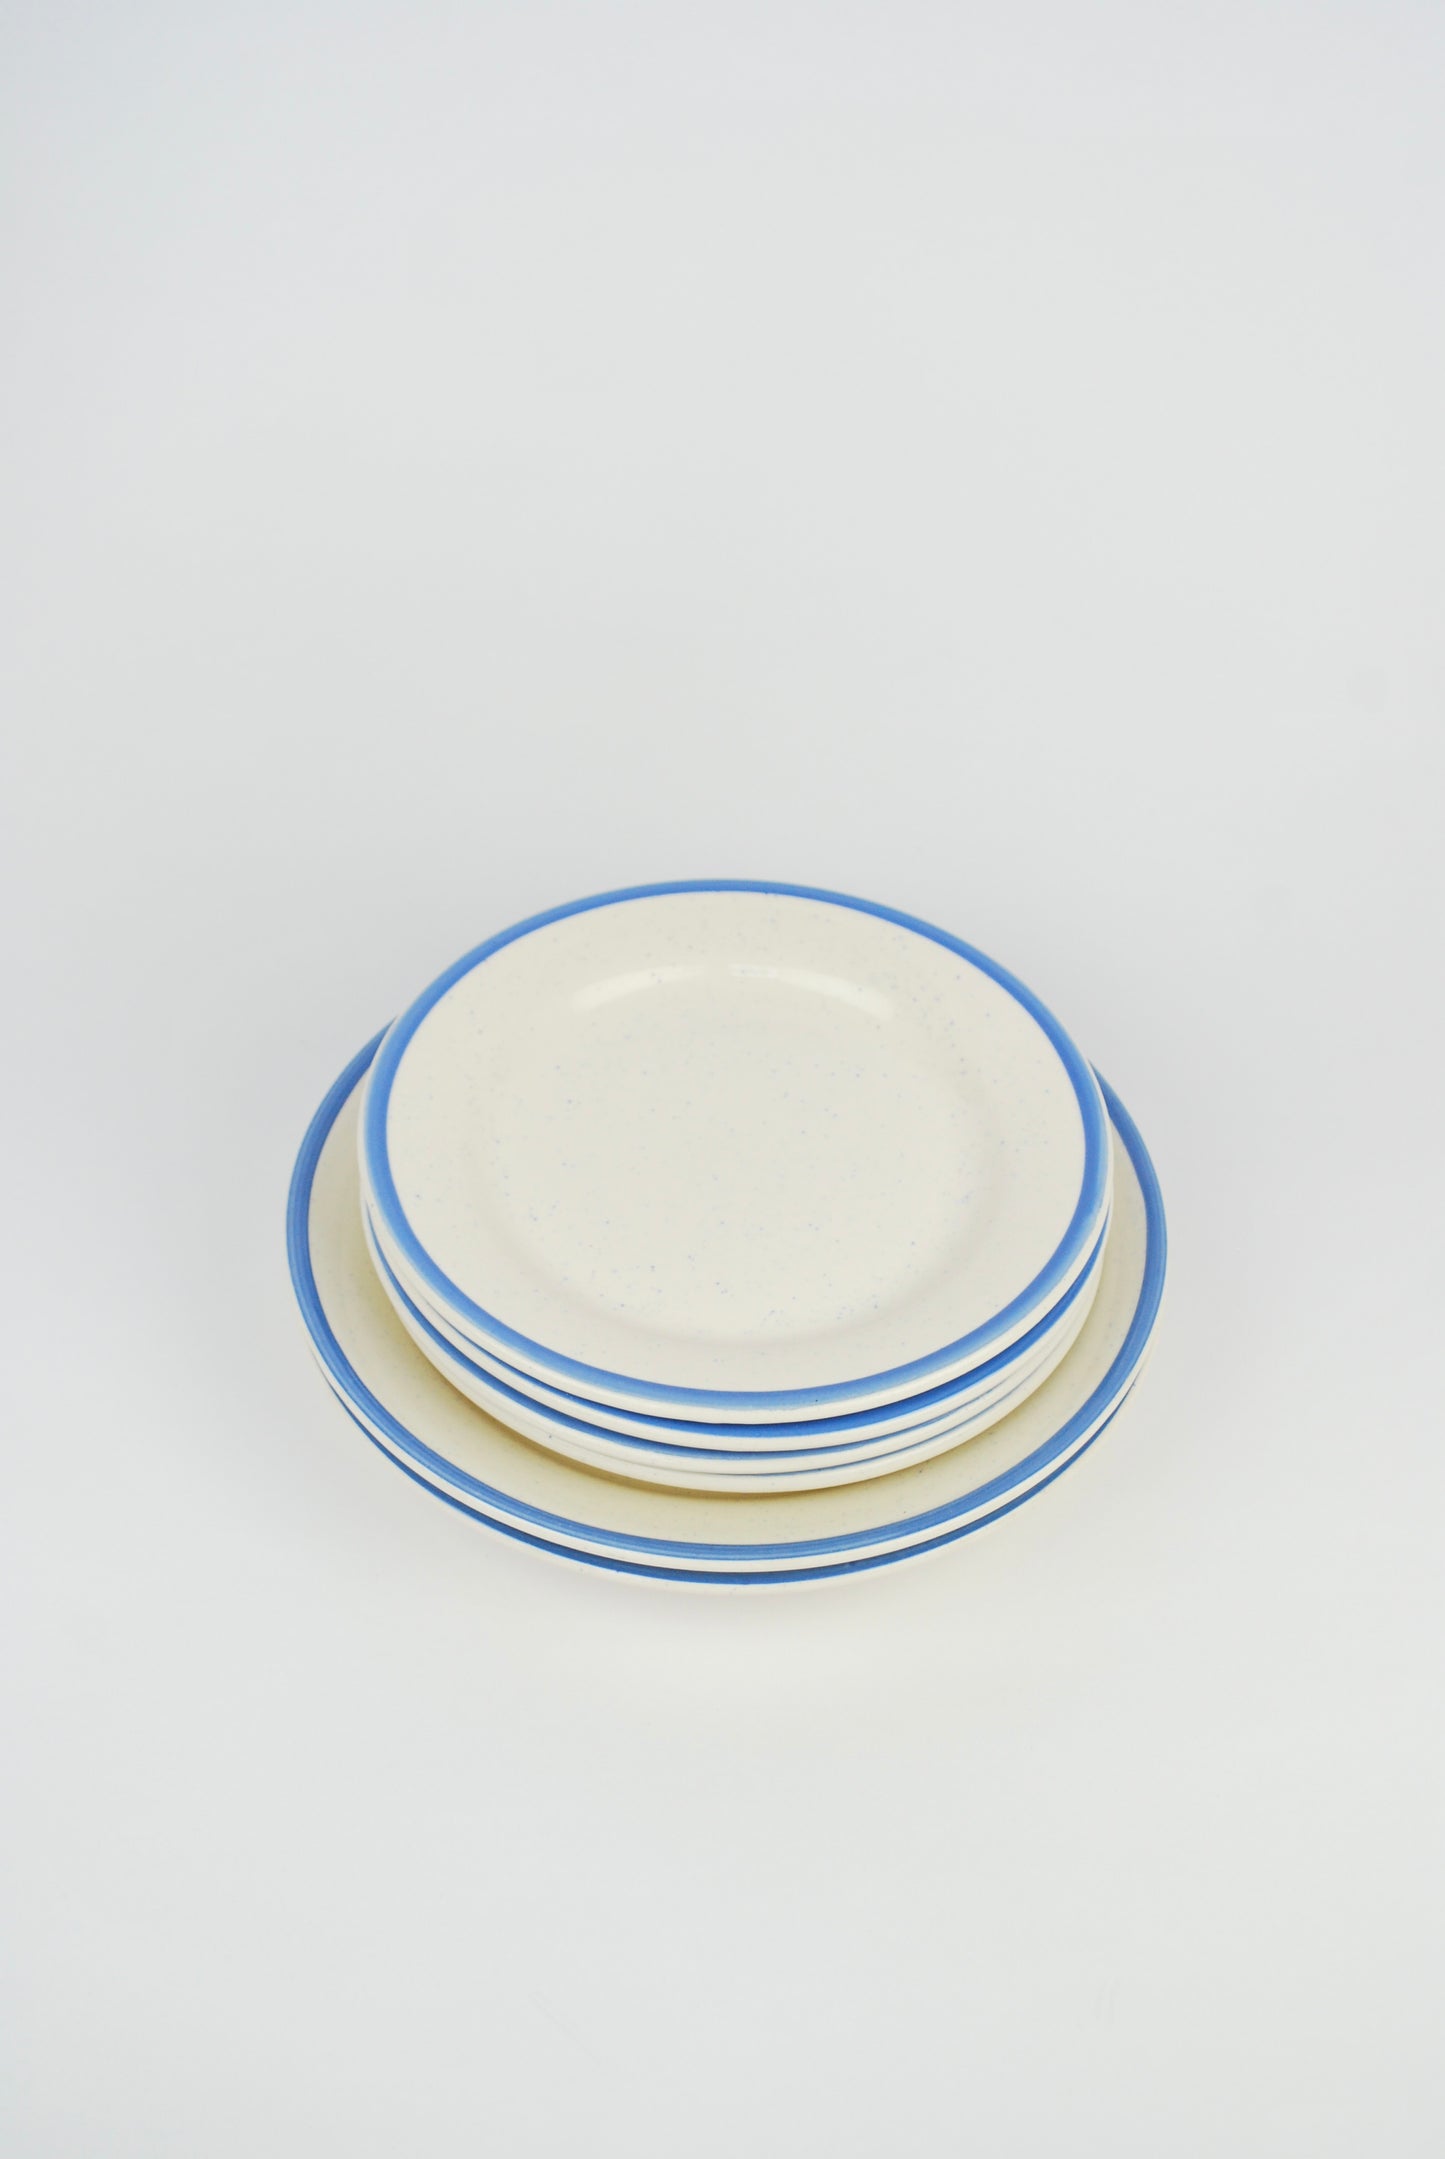 six white plates with blue rim and spots